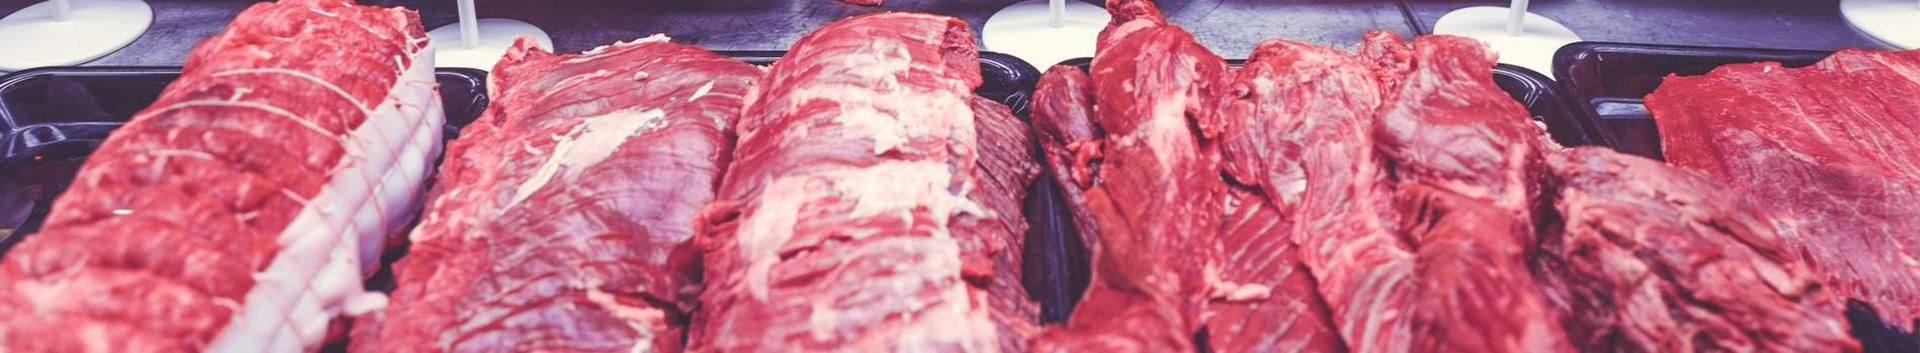 Meat industry and other related services, products, consultations